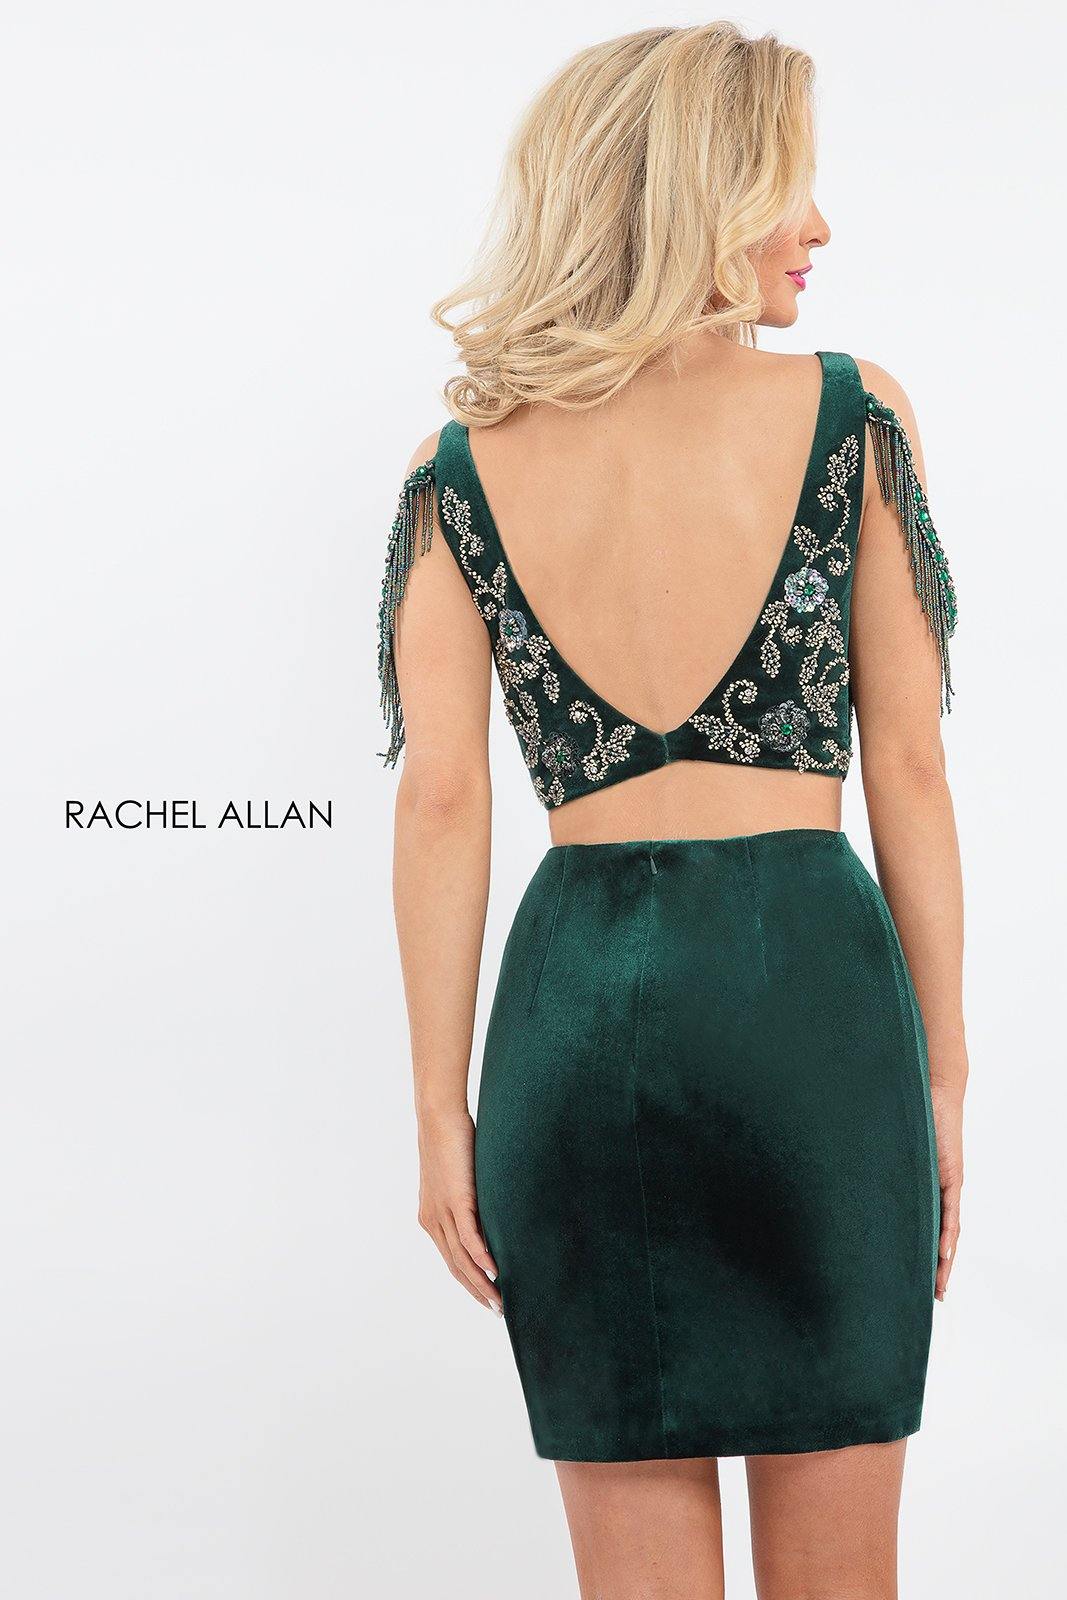 Rachel Allan Sexy Two Piece Homecoming Dress - The Dress Outlet